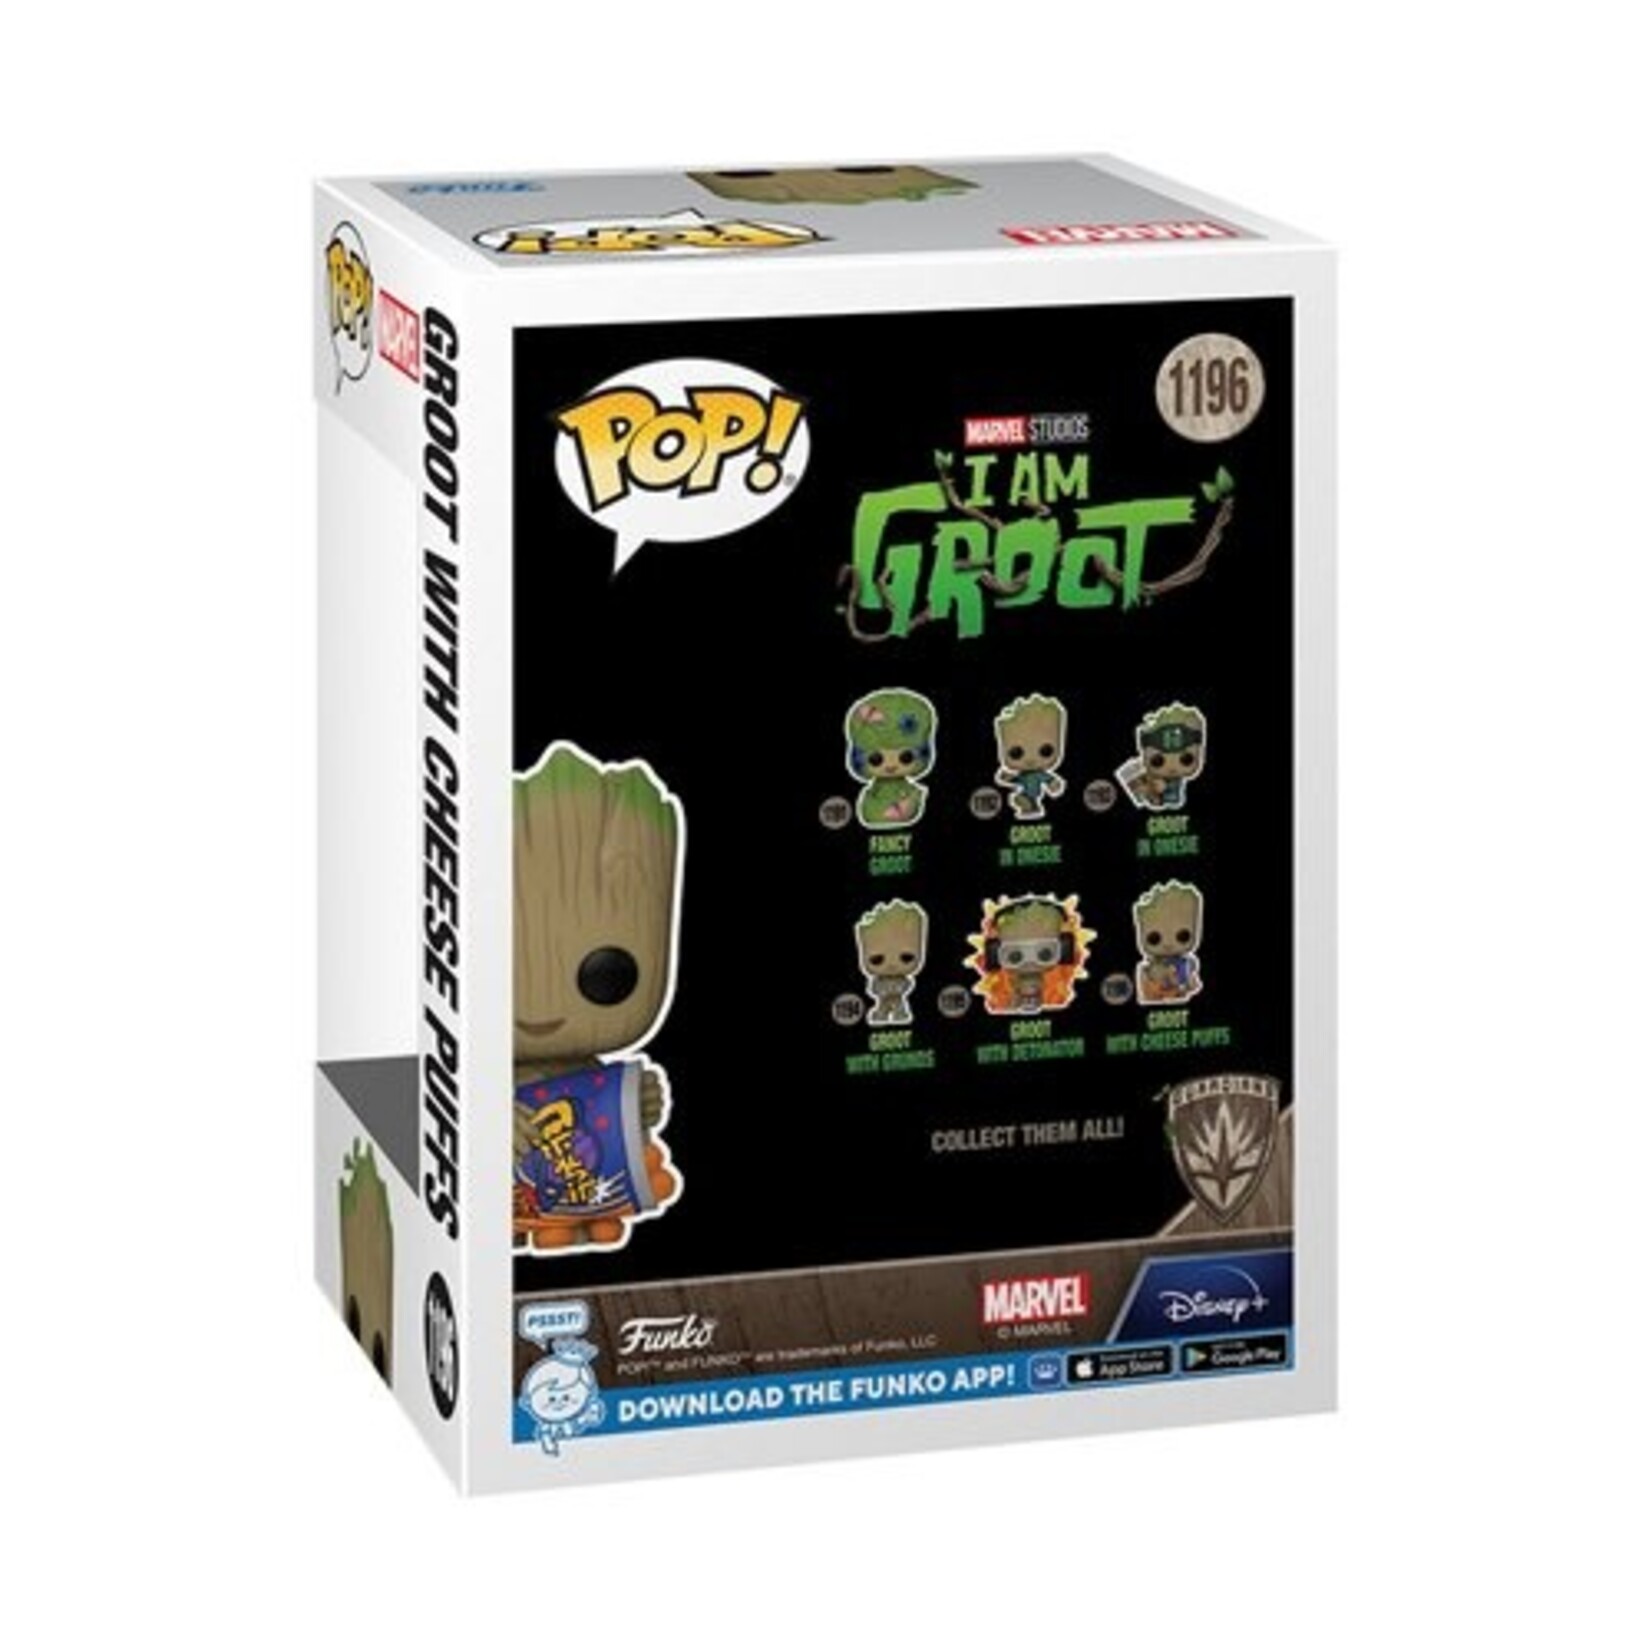 Funko Funko Pop! Marvel: I Am Groot, Groot with Cheese Puffs #1196